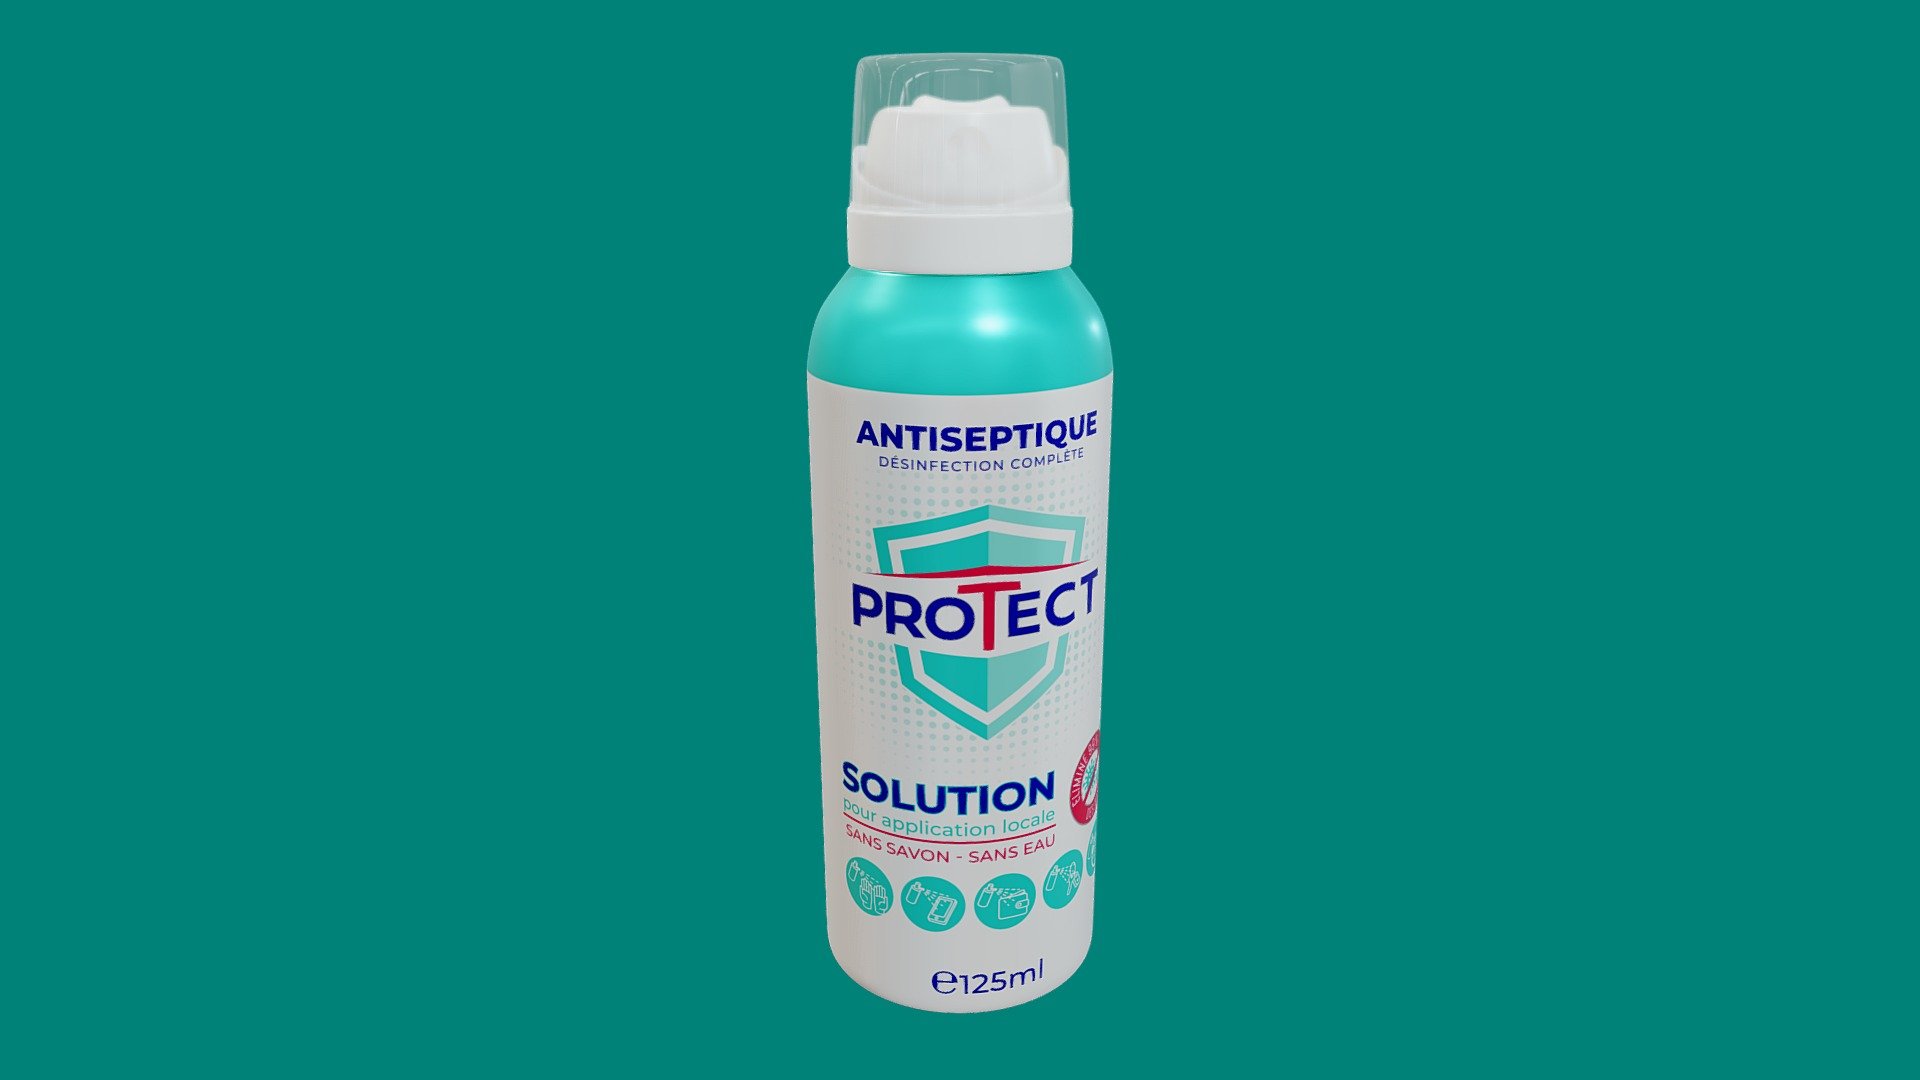 Protect Antiseptic Spray solution - Antiseptic Spray - 3D model by atakor 3d model